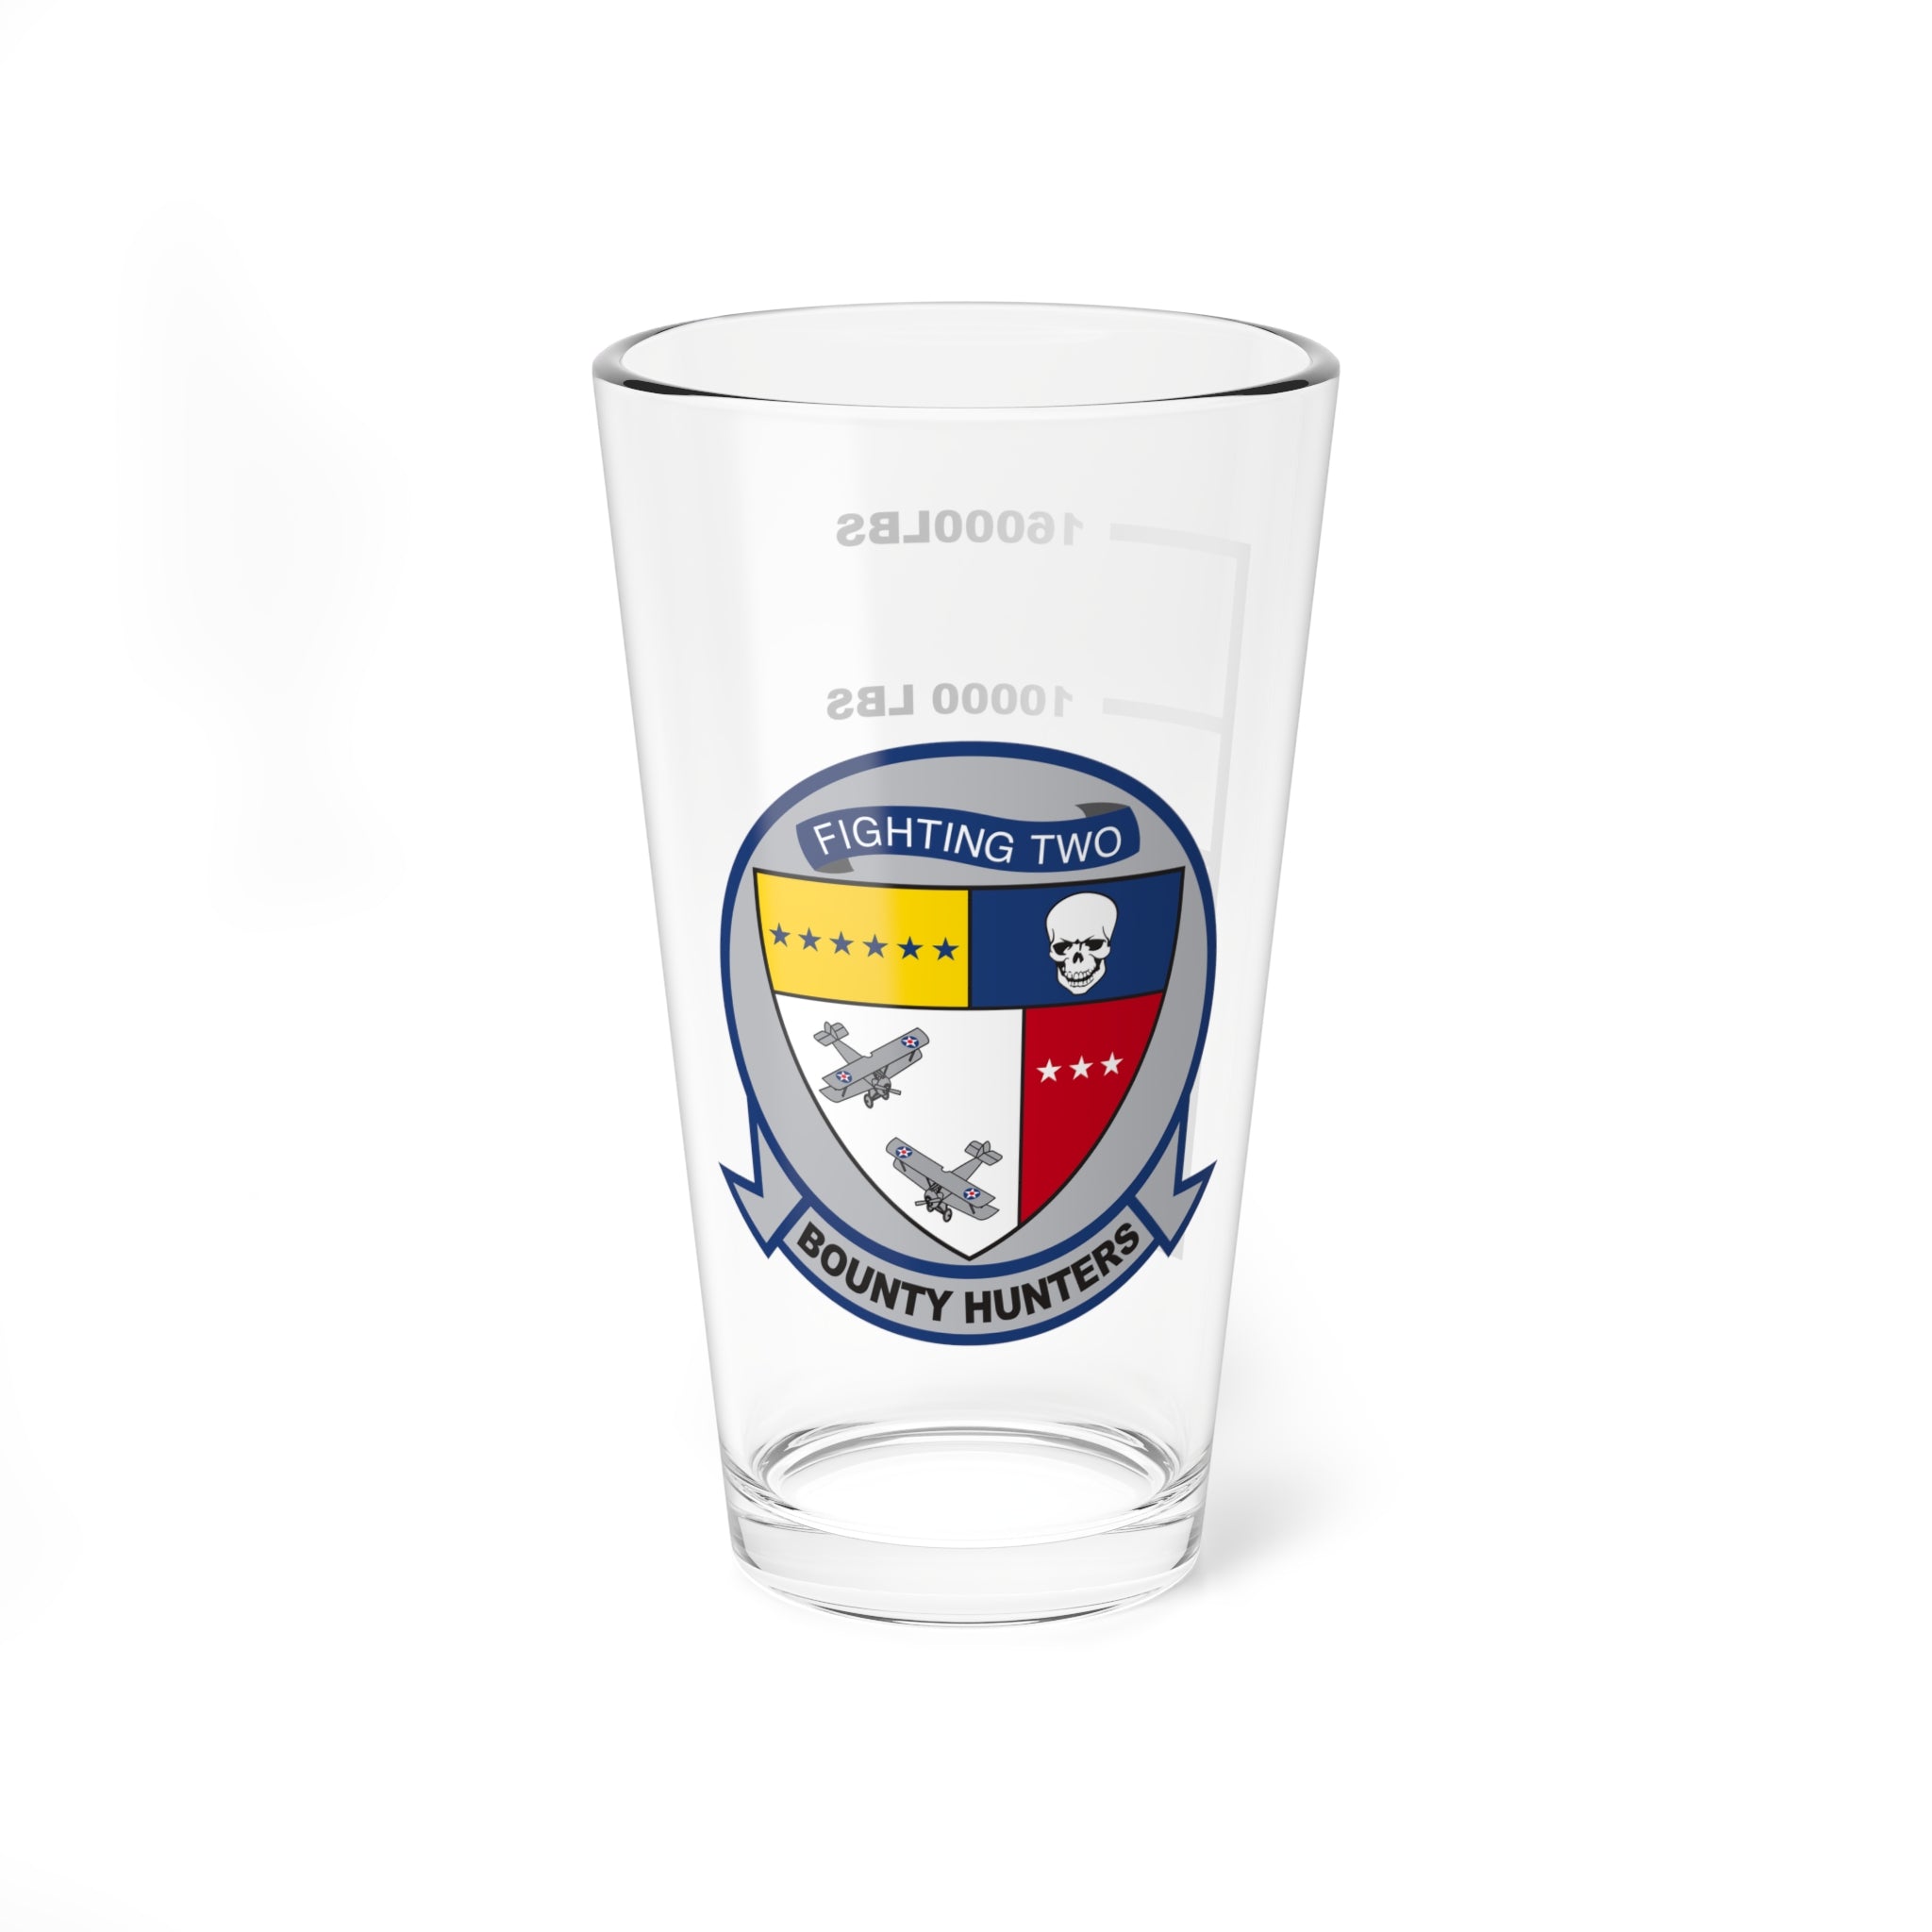 VF-2 "Bounty Hunters" Fuel Low Pint Glass, Navy Strike Fighter Squadron flying the F-14 Tomcat